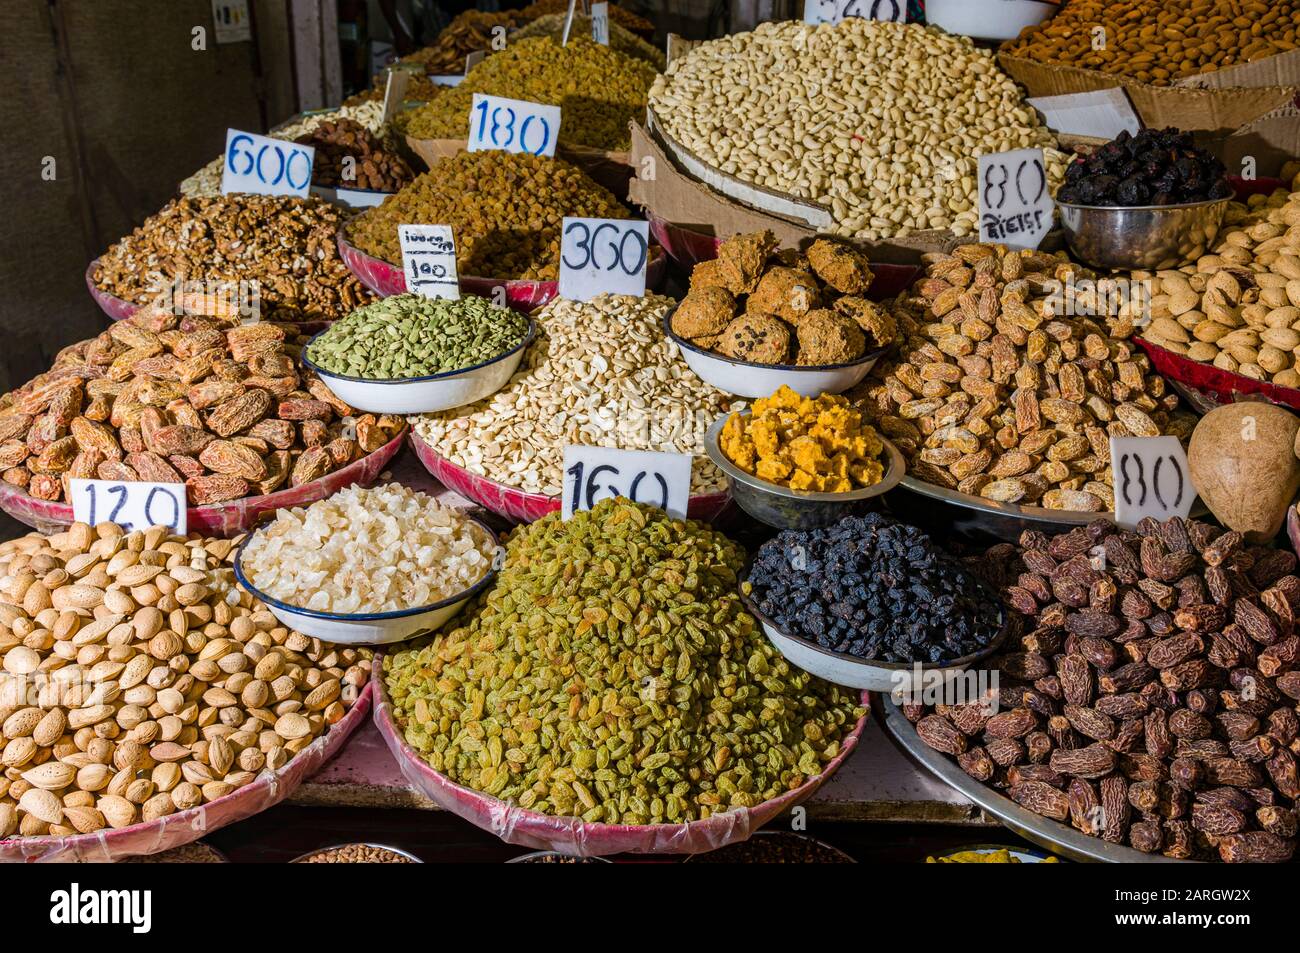 Nuts and many different spices are for sale in the spice market in Old Delhi Stock Photo